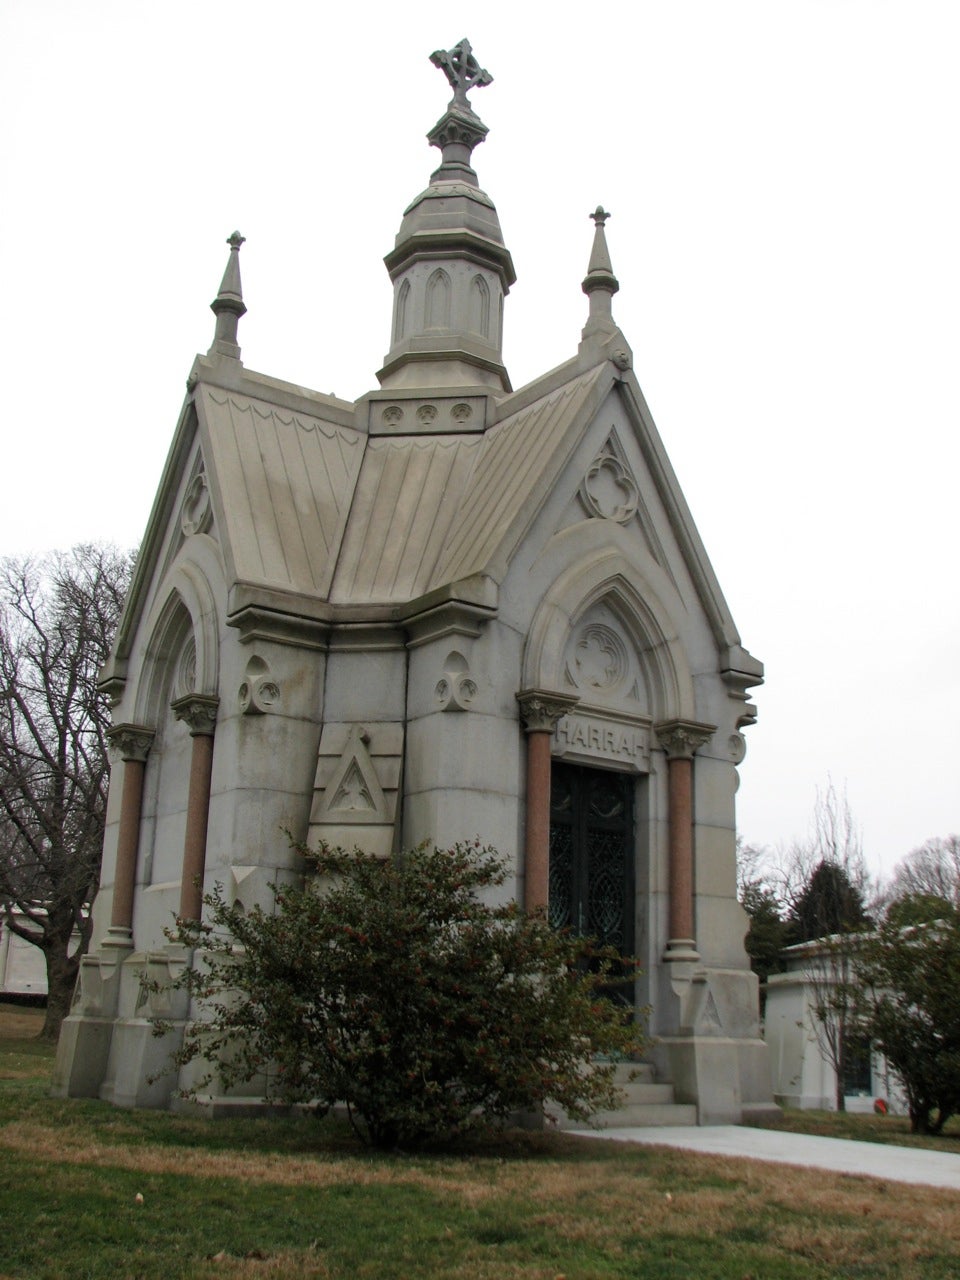 The Harrah family modeled their resting place after a Gothic chapel.  